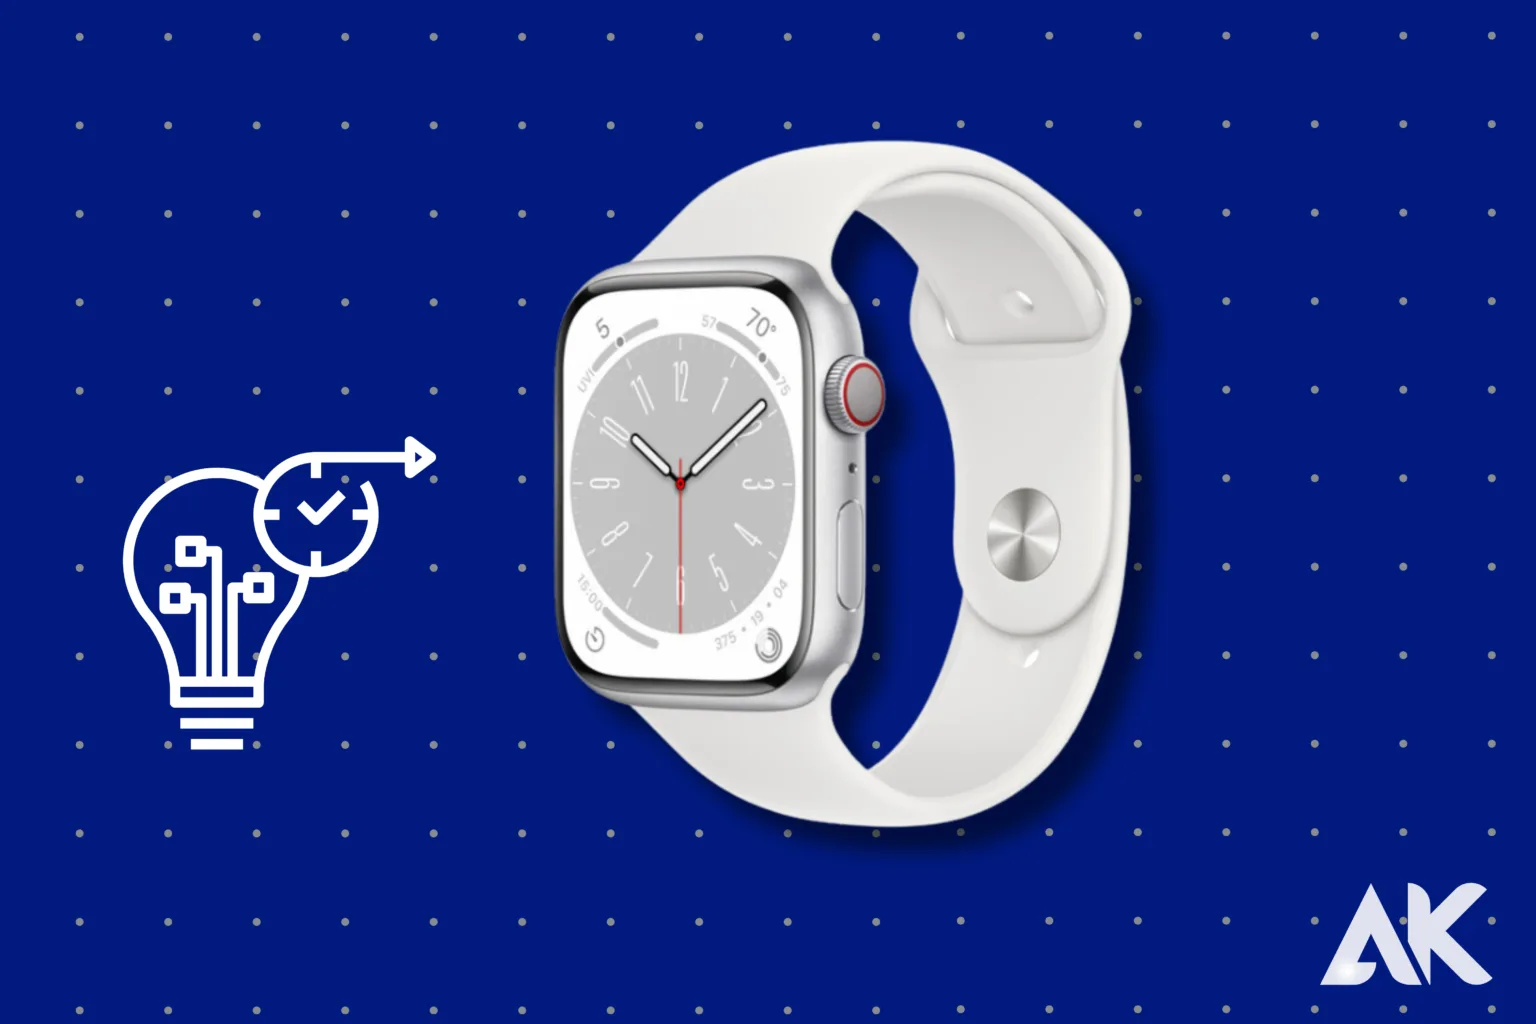 Upgrade Your Style and Fitness with the Apple Watch - 8 tIPS